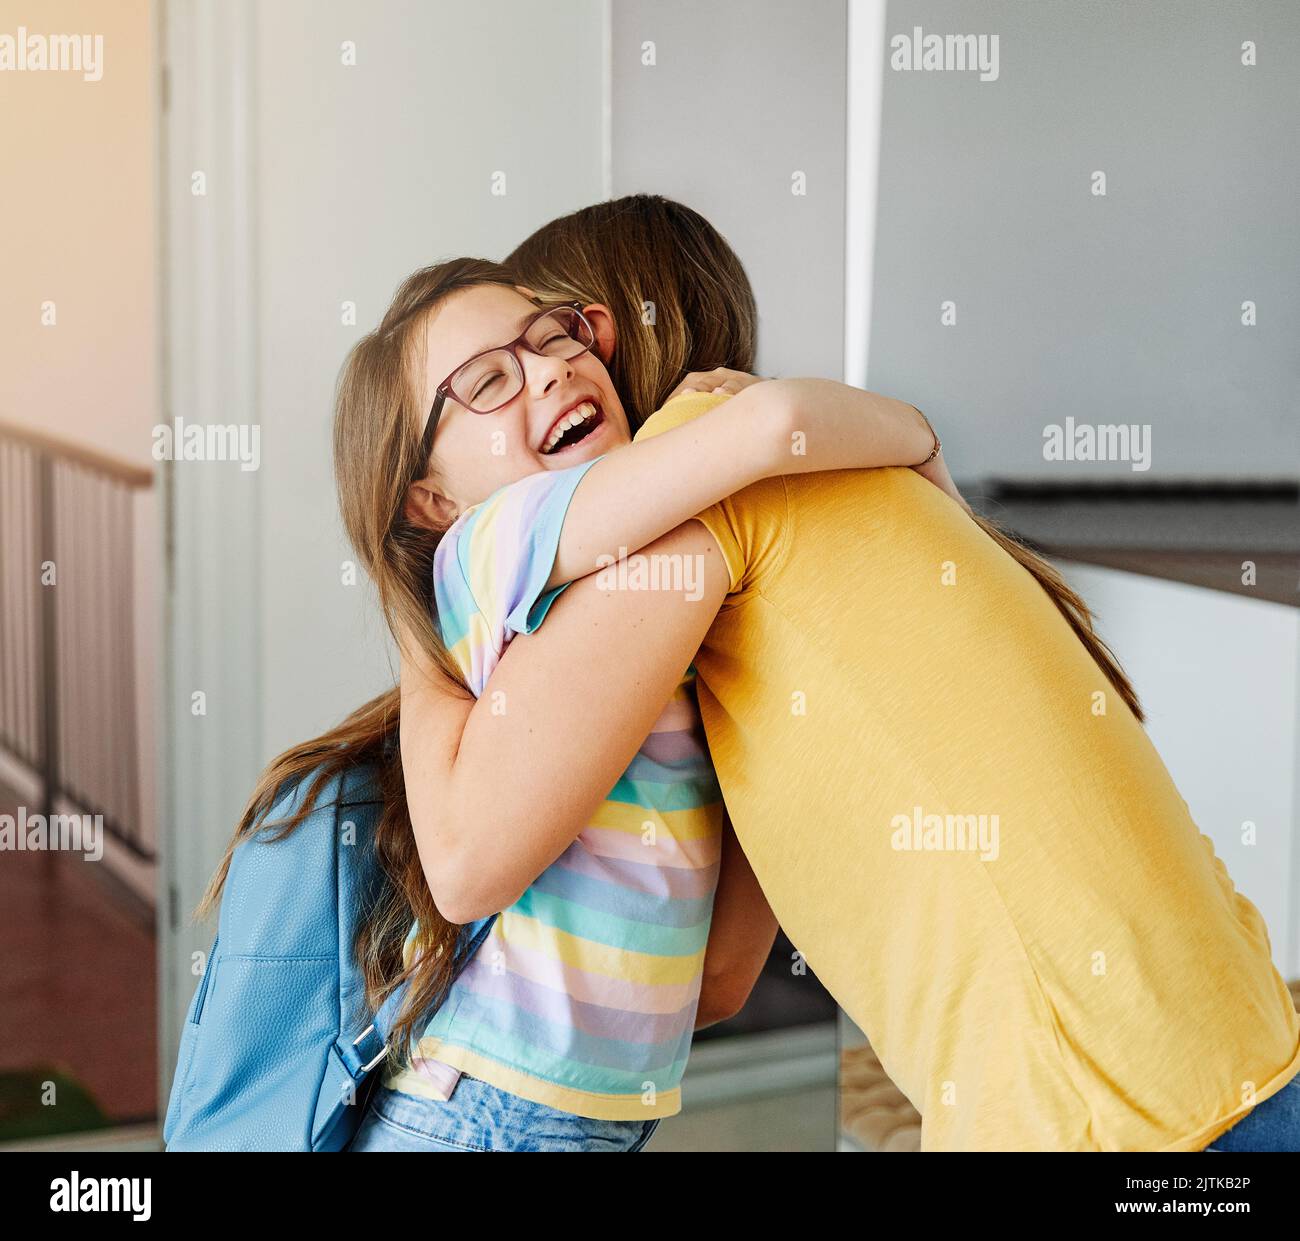 child mother daughter backpack house education school family student welcome hug together love woman elementary home girl woman Stock Photo